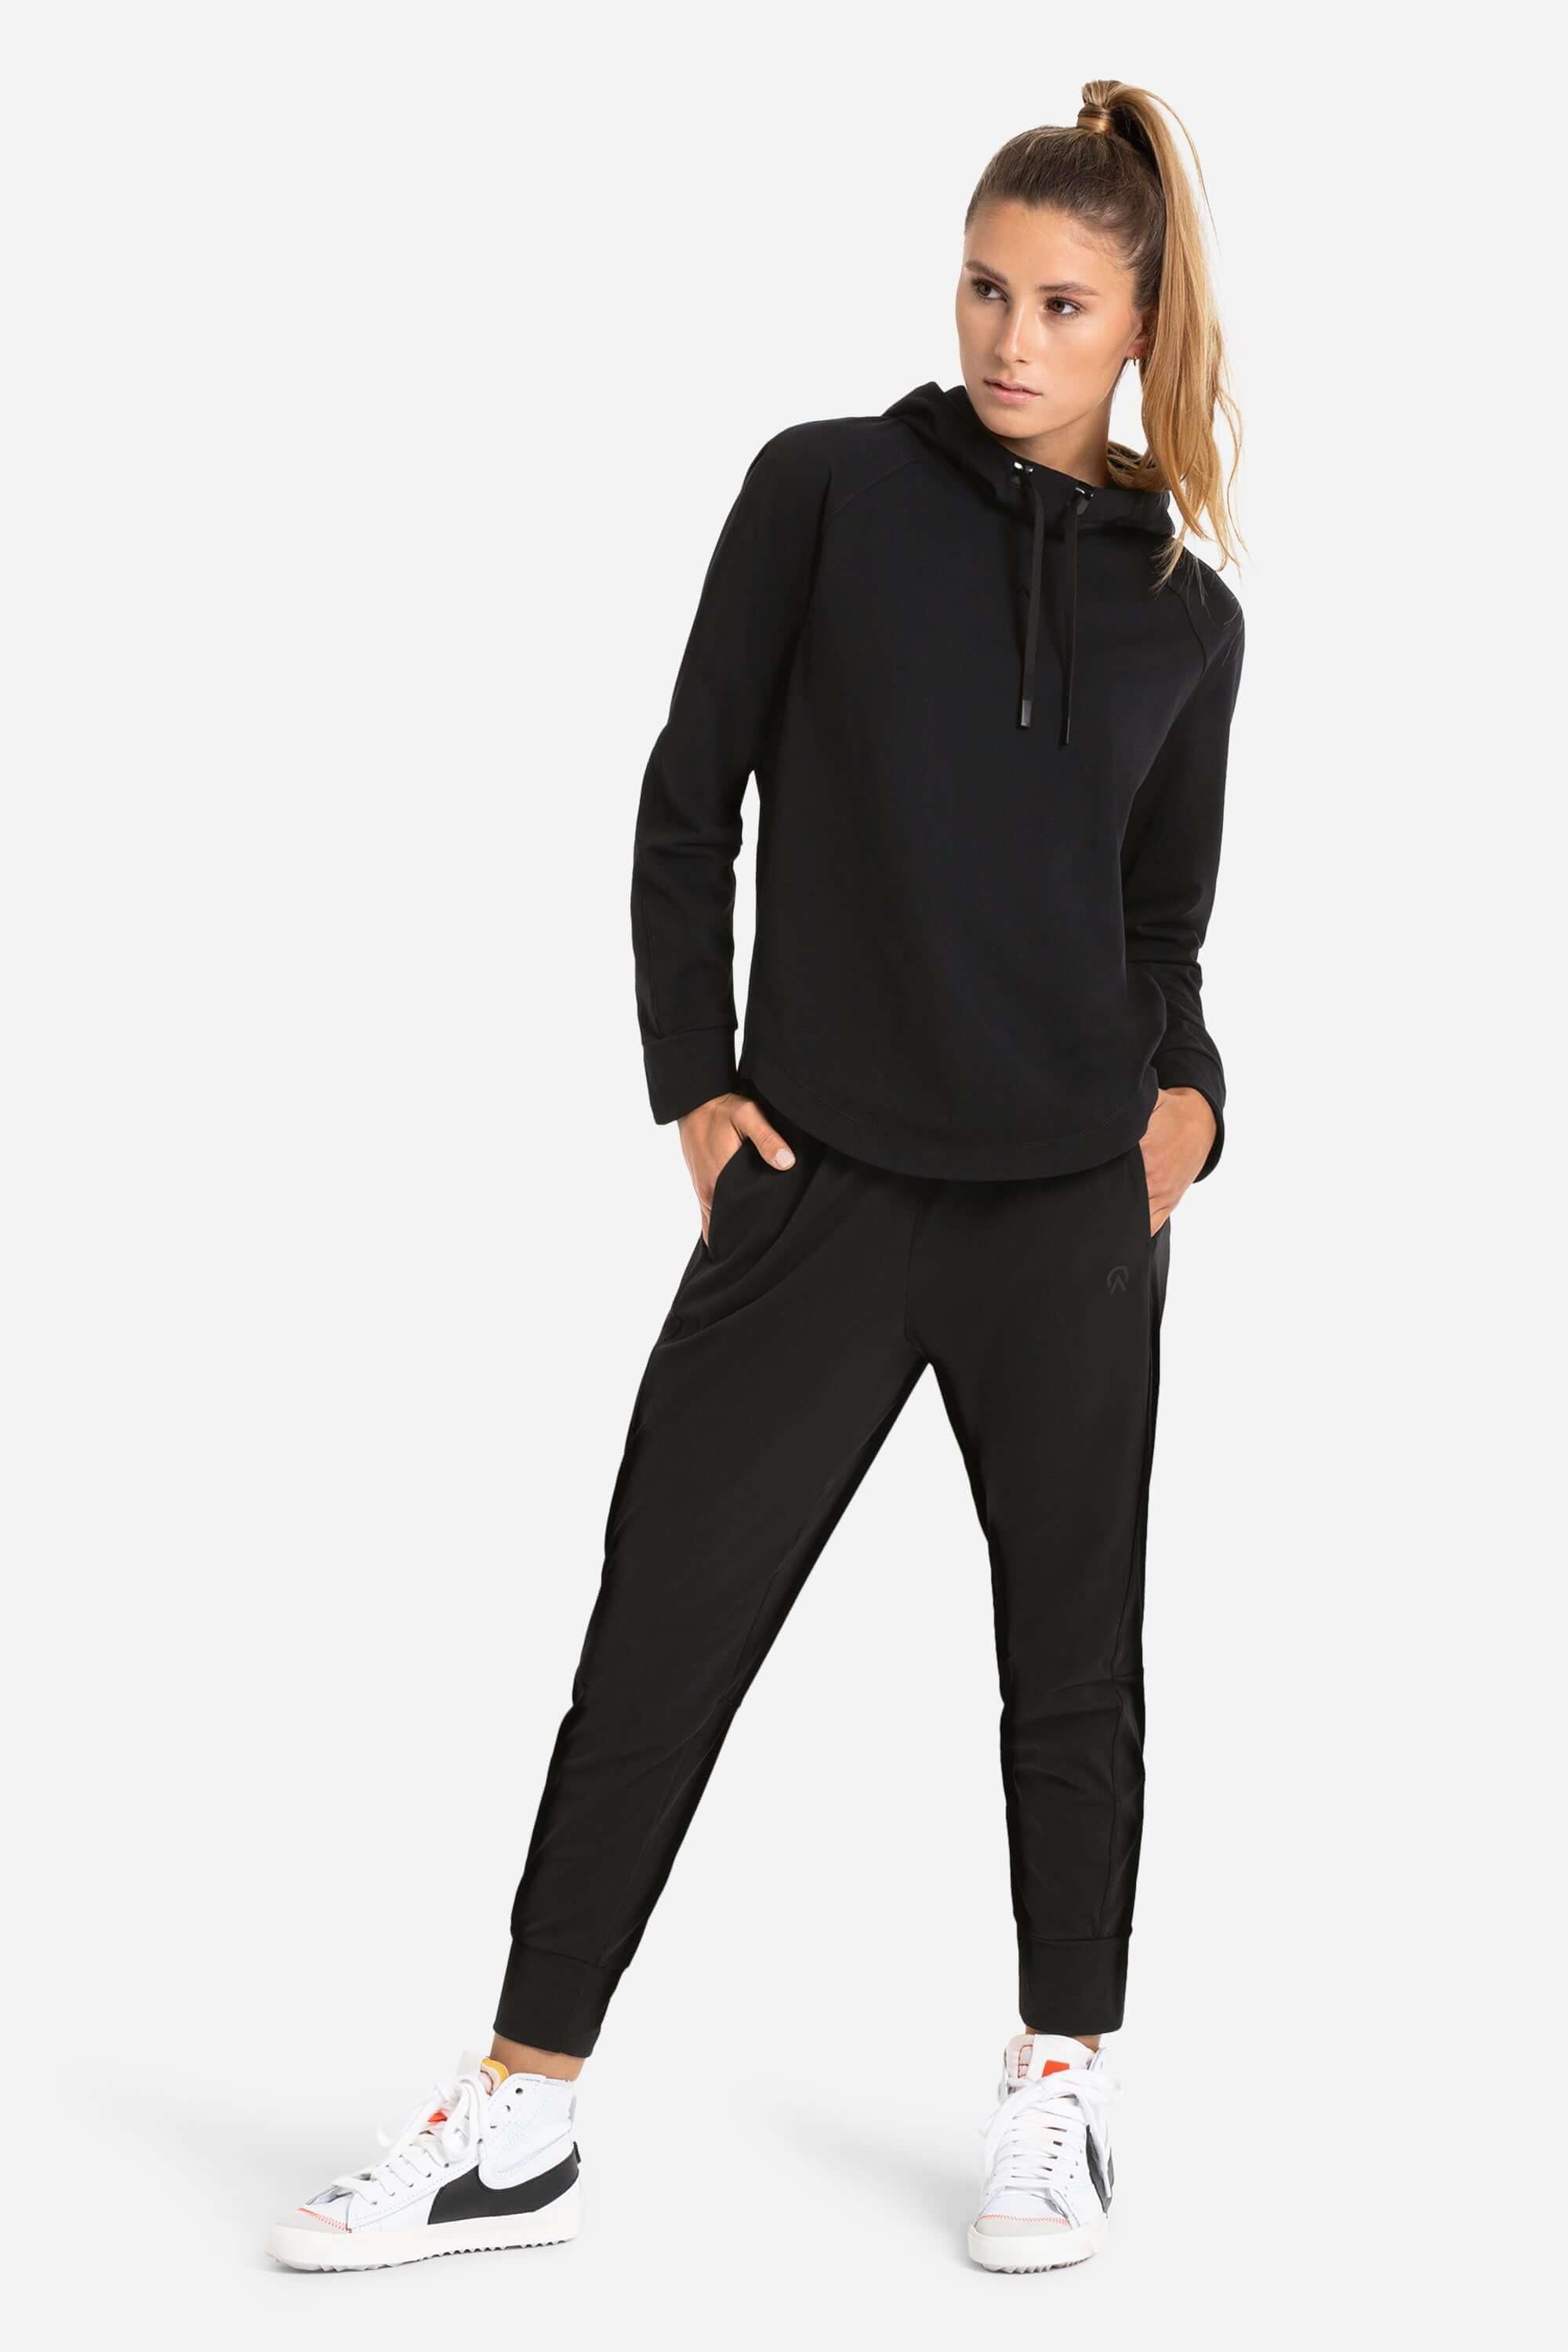 Women wearing a black training hoodie and gym jogger